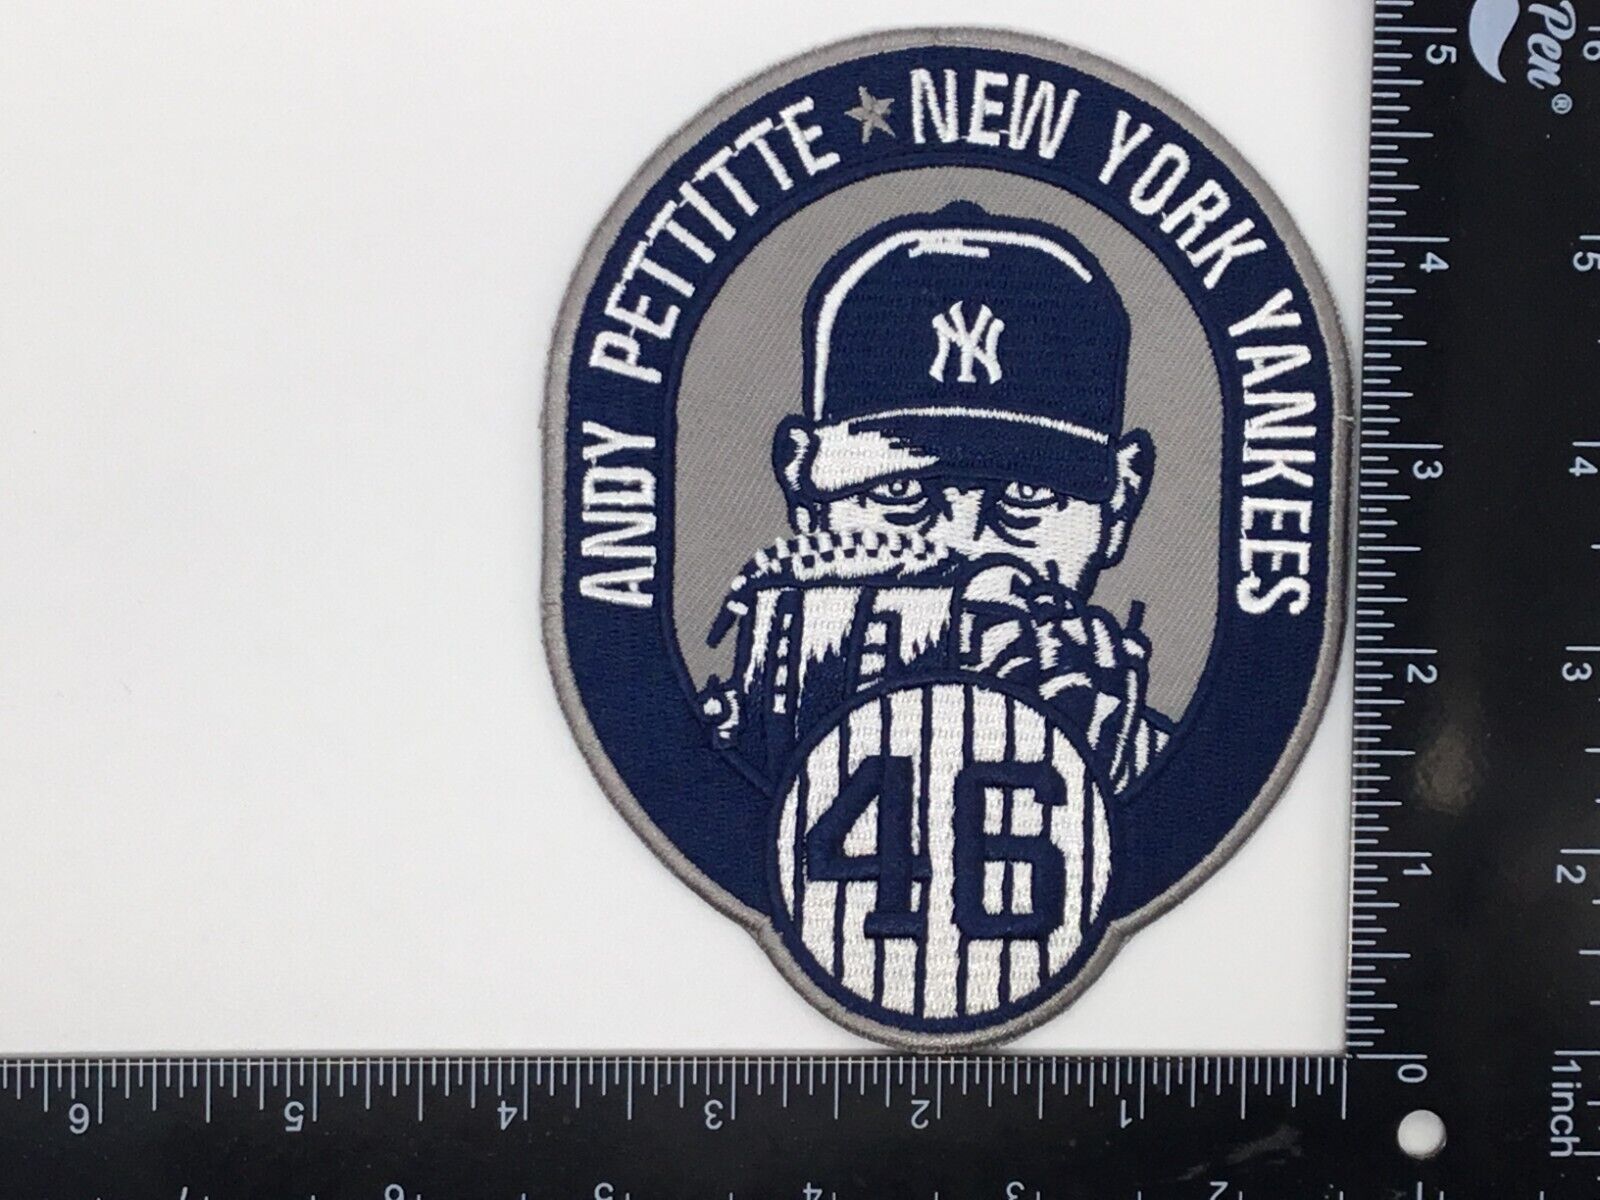 2015 MLB New York Yankees Andy Pettitte #46 Retirement Jersey Sleeve Patch 